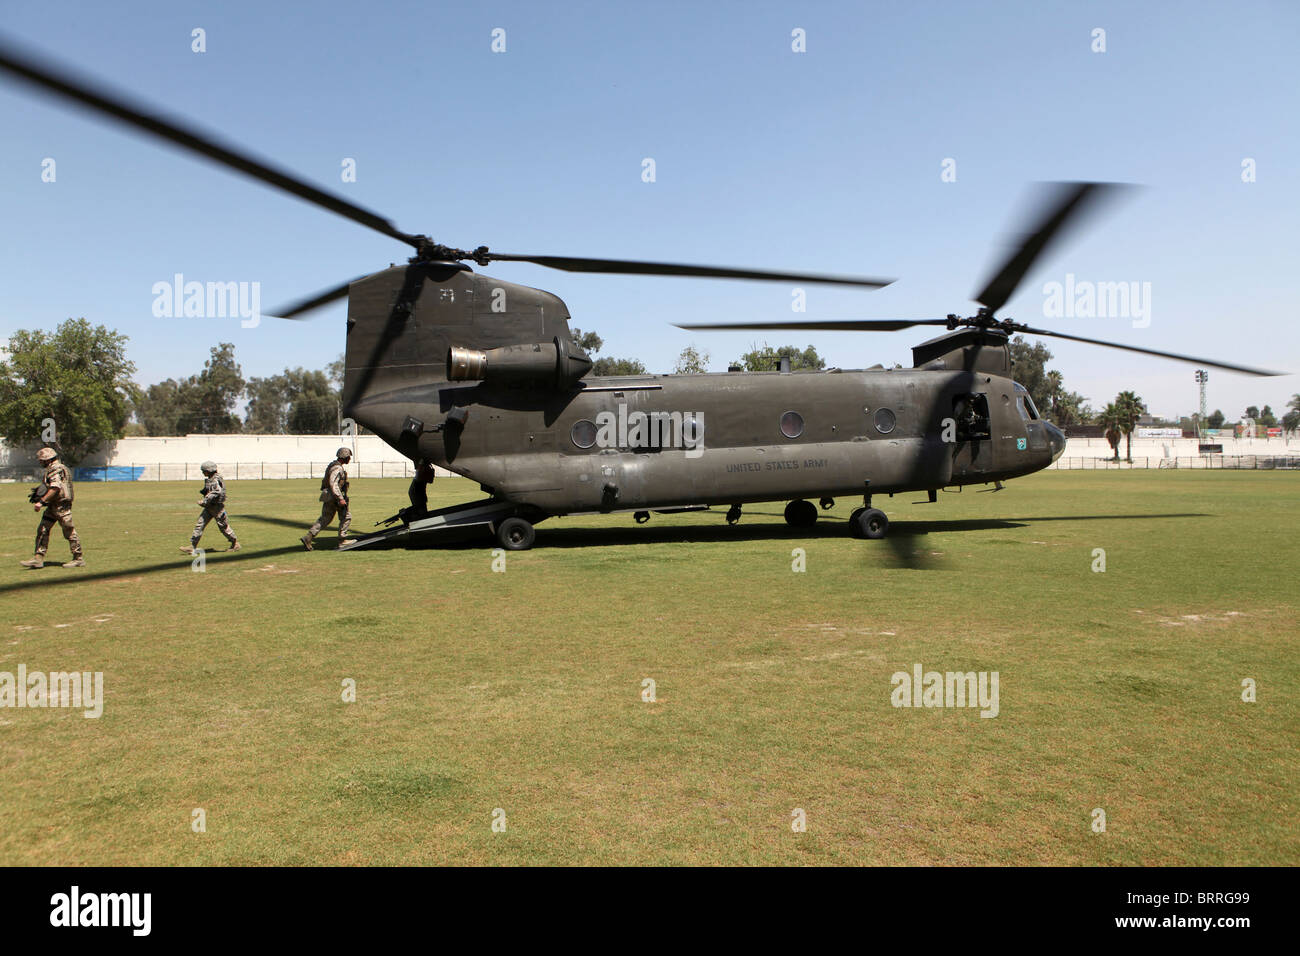 US chinook helicopter in Afghanistan Stock Photo